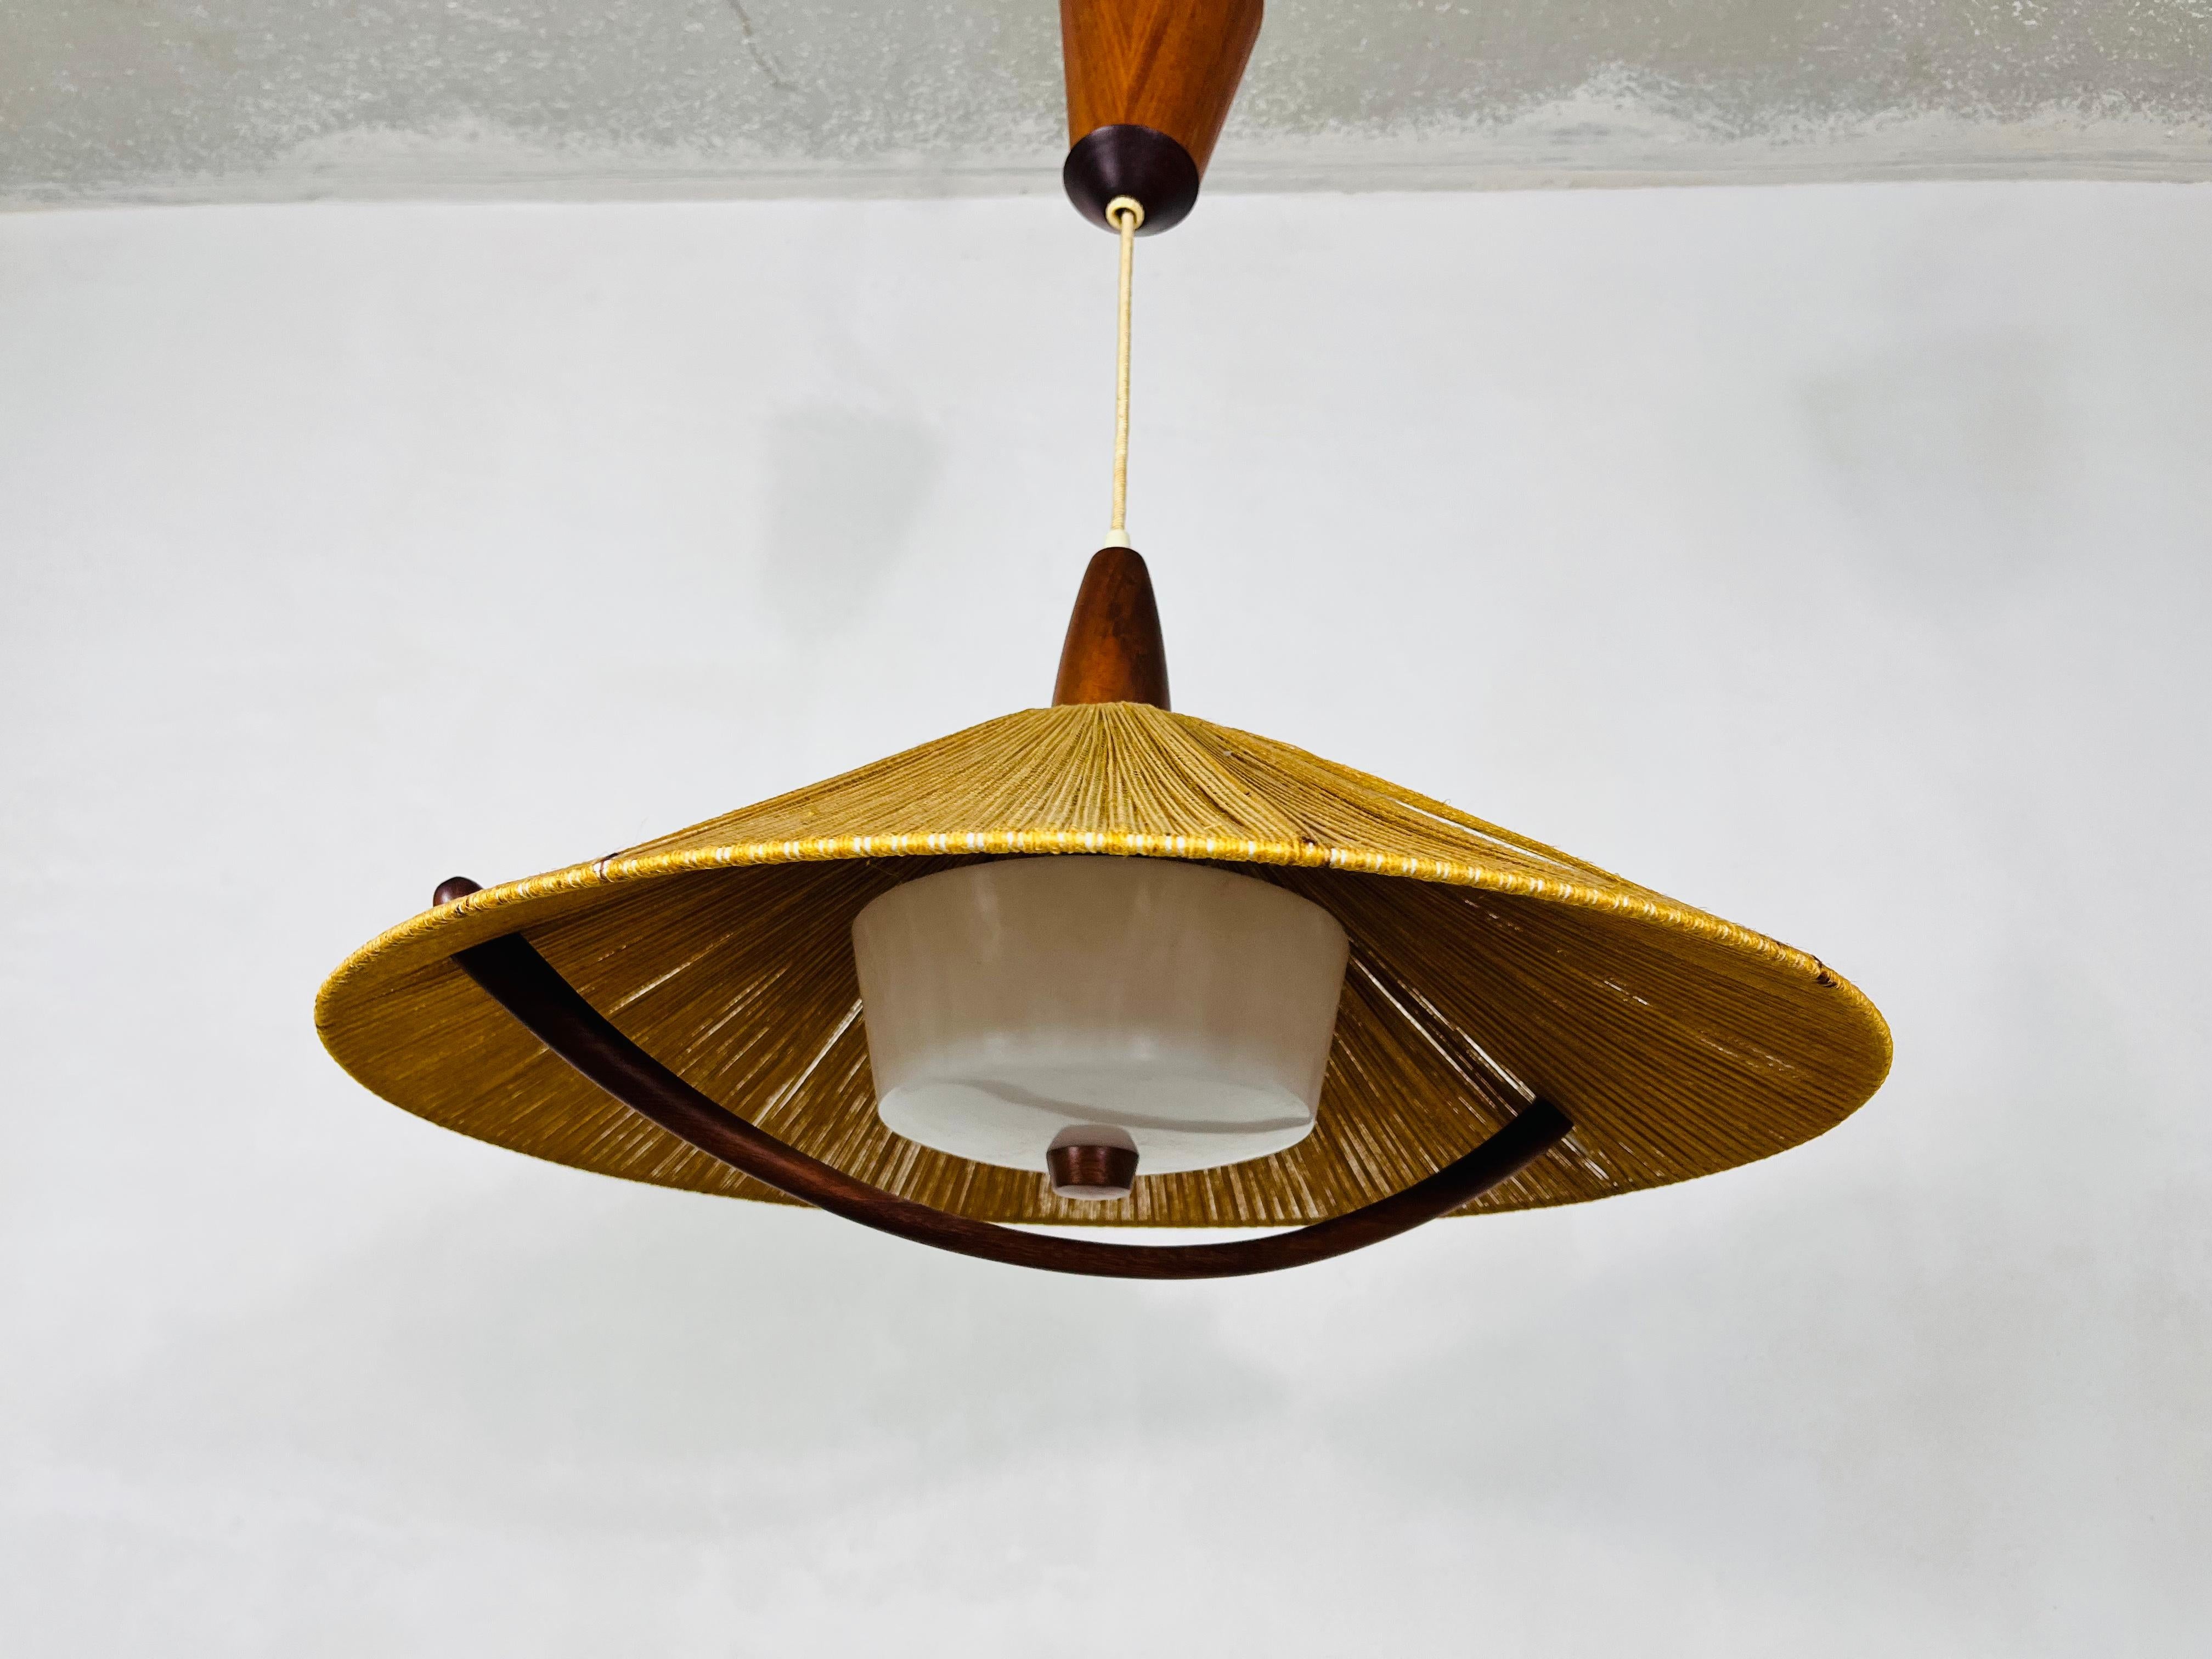 Midcentury Teak and Cord Shade Hanging Lamp by Temde, circa 1960 In Good Condition For Sale In Hagenbach, DE